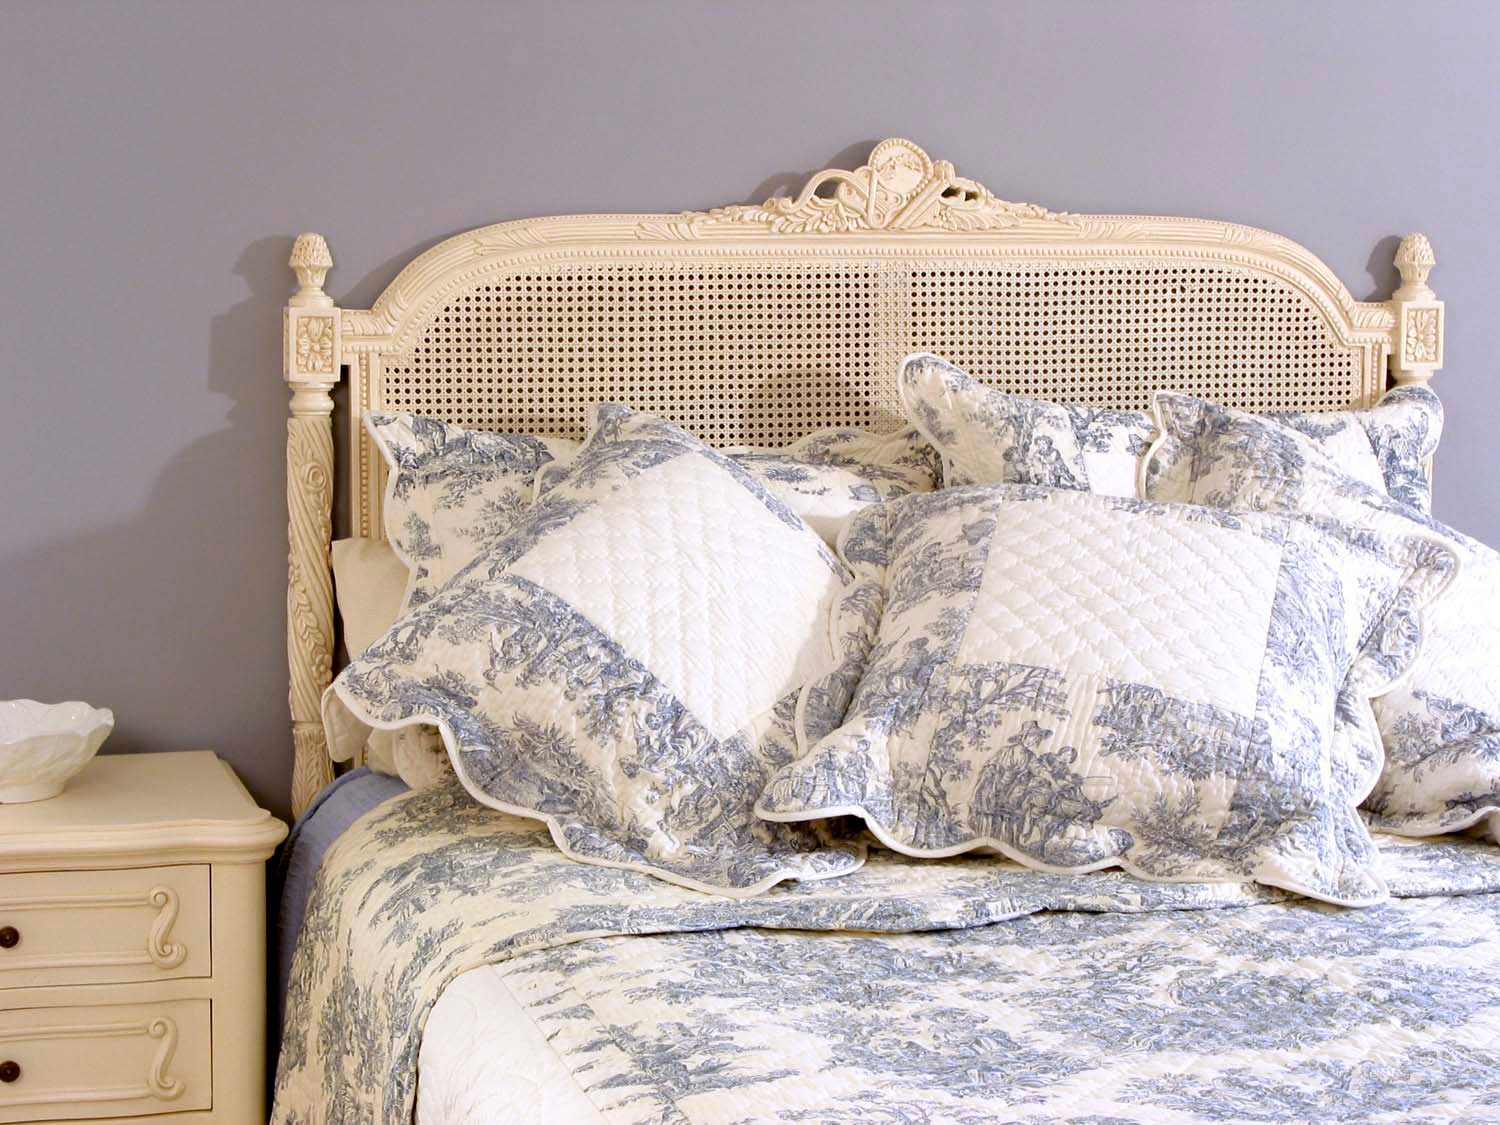 1 White painted bed with beautiful blue fabrics